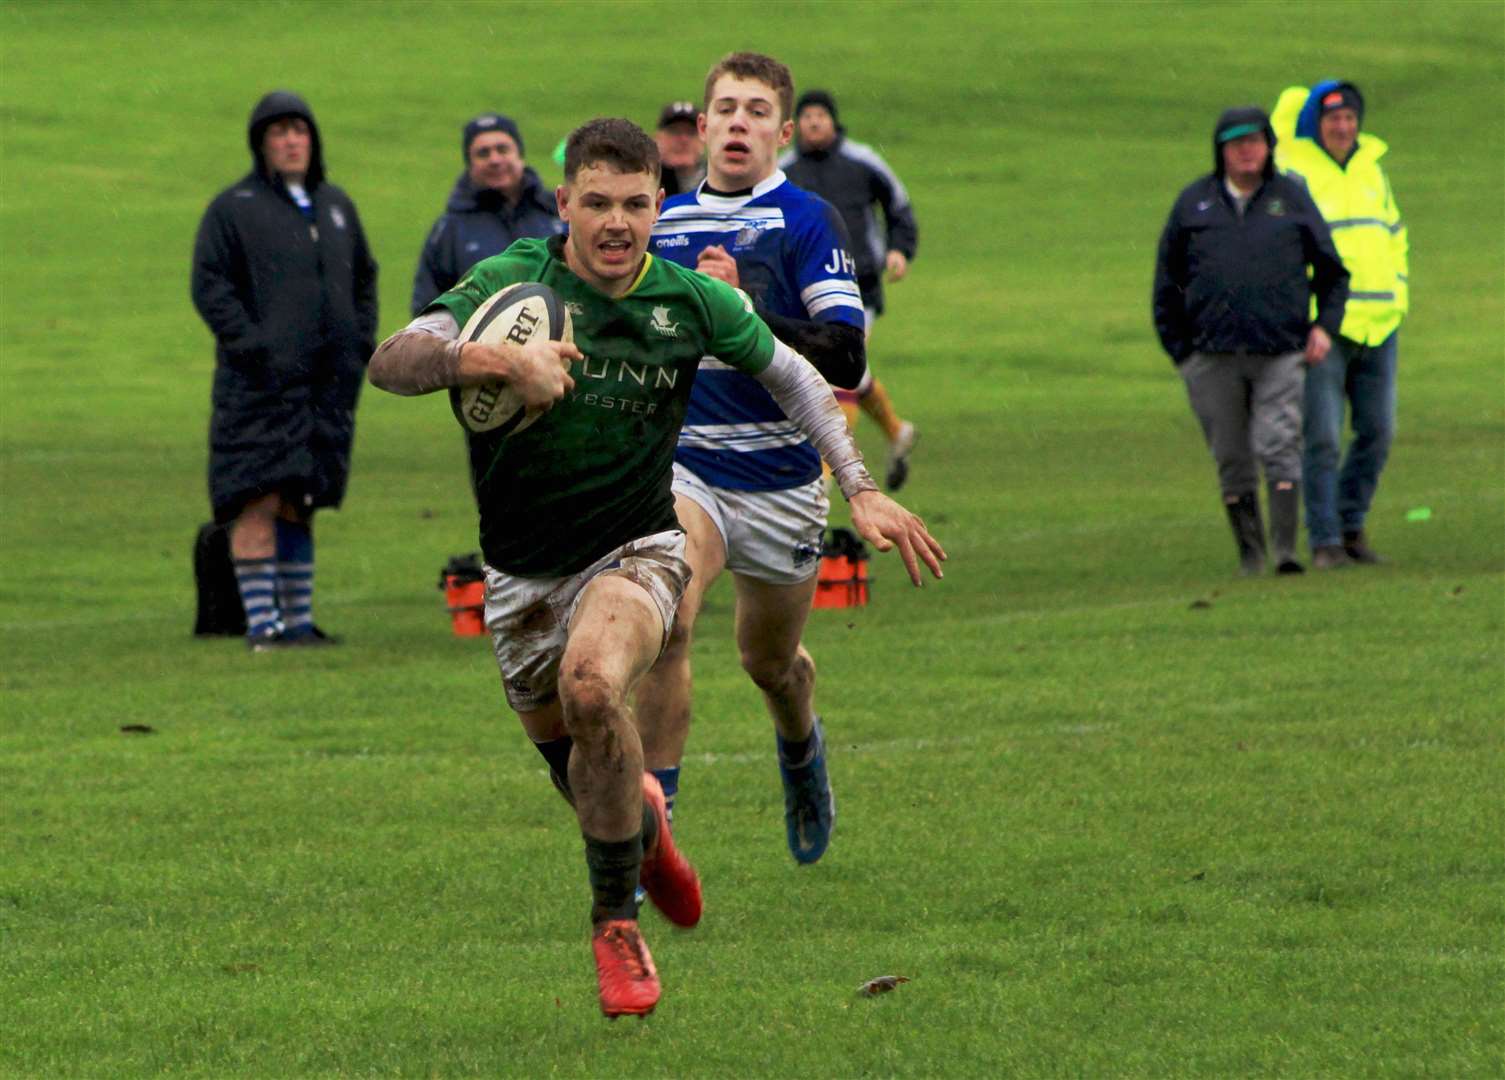 Cameron Ryder races through for the Greens' bonus-point fourth try against Dunfermline at the end of October. This was Dunfermline's last defeat. Picture: Alan Hendry